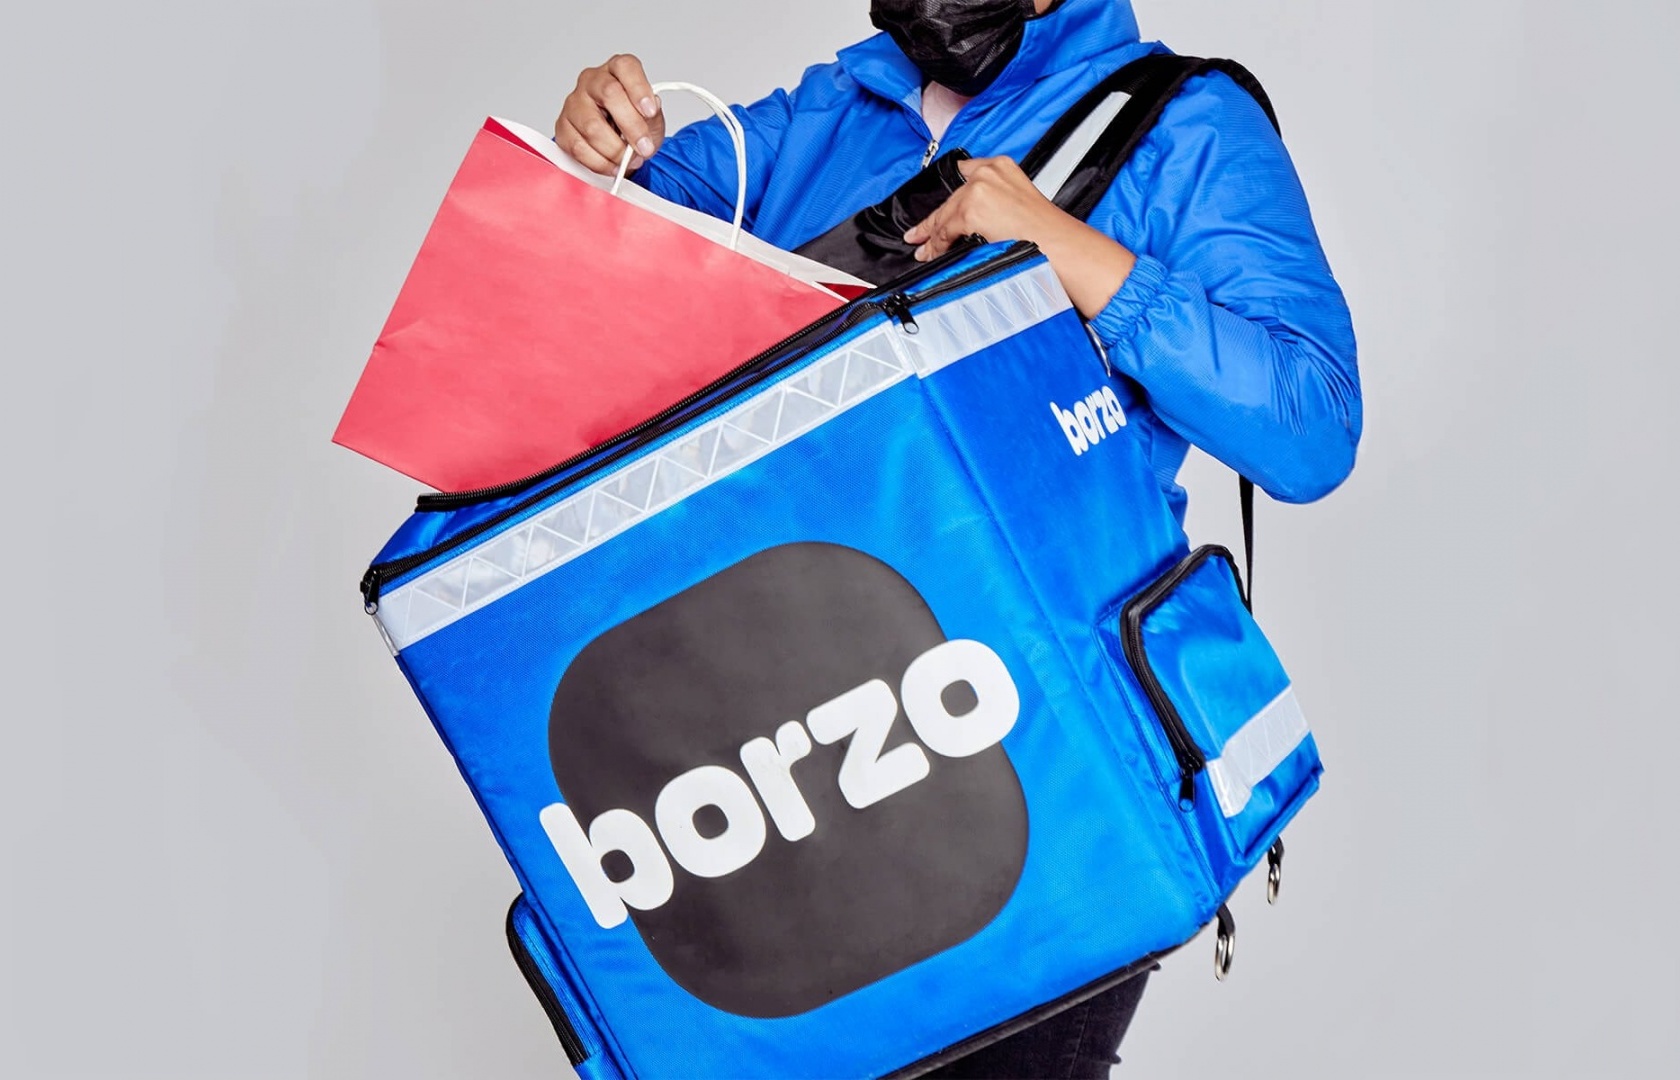 International delivery company Borzo increases footprint in Vietnam